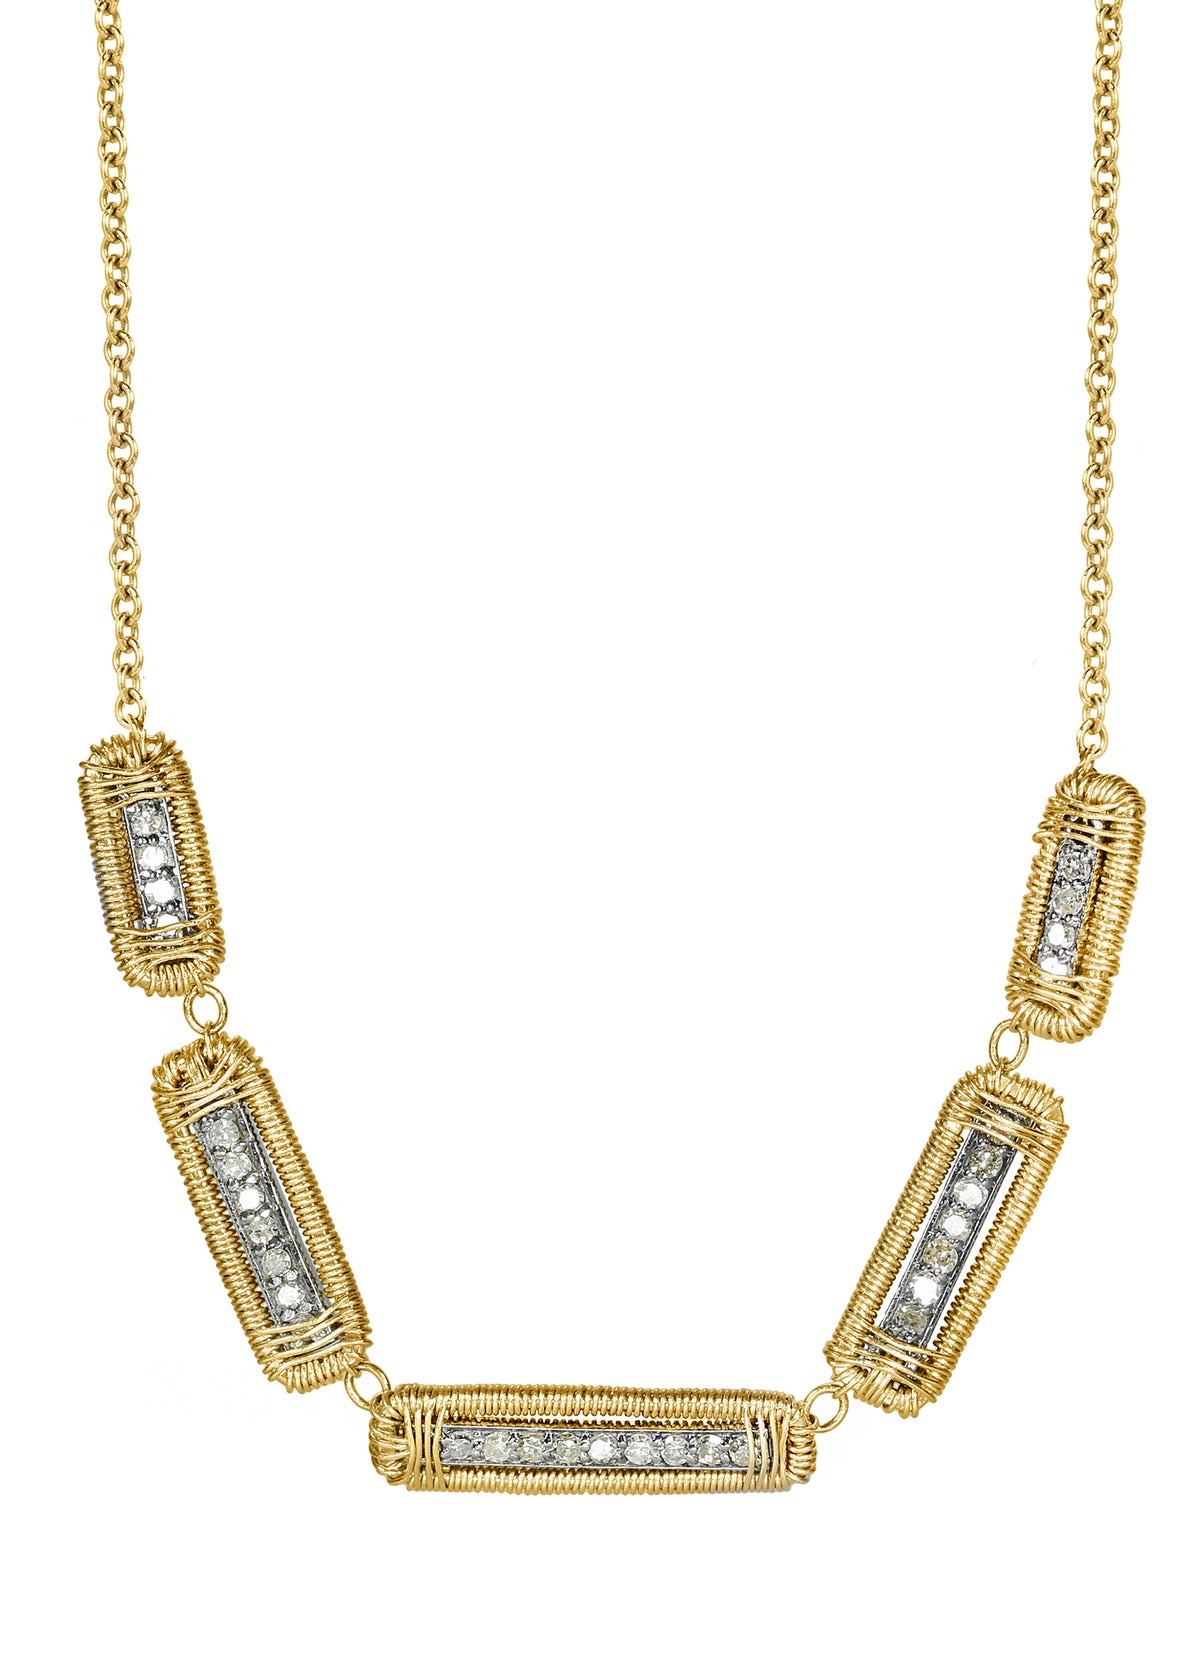 Diamond 14k gold Sterling silver Mixed metal Special order only Necklace measures 16&quot; in length Pendants measure 3/8&quot; in length and 3/16&quot; in width (x2), 1/2&quot; in length and 3/16&quot; width (x2), and 3/16&quot; in length and 5/8&quot; in width (x1) Handmade in our Los Angeles studio